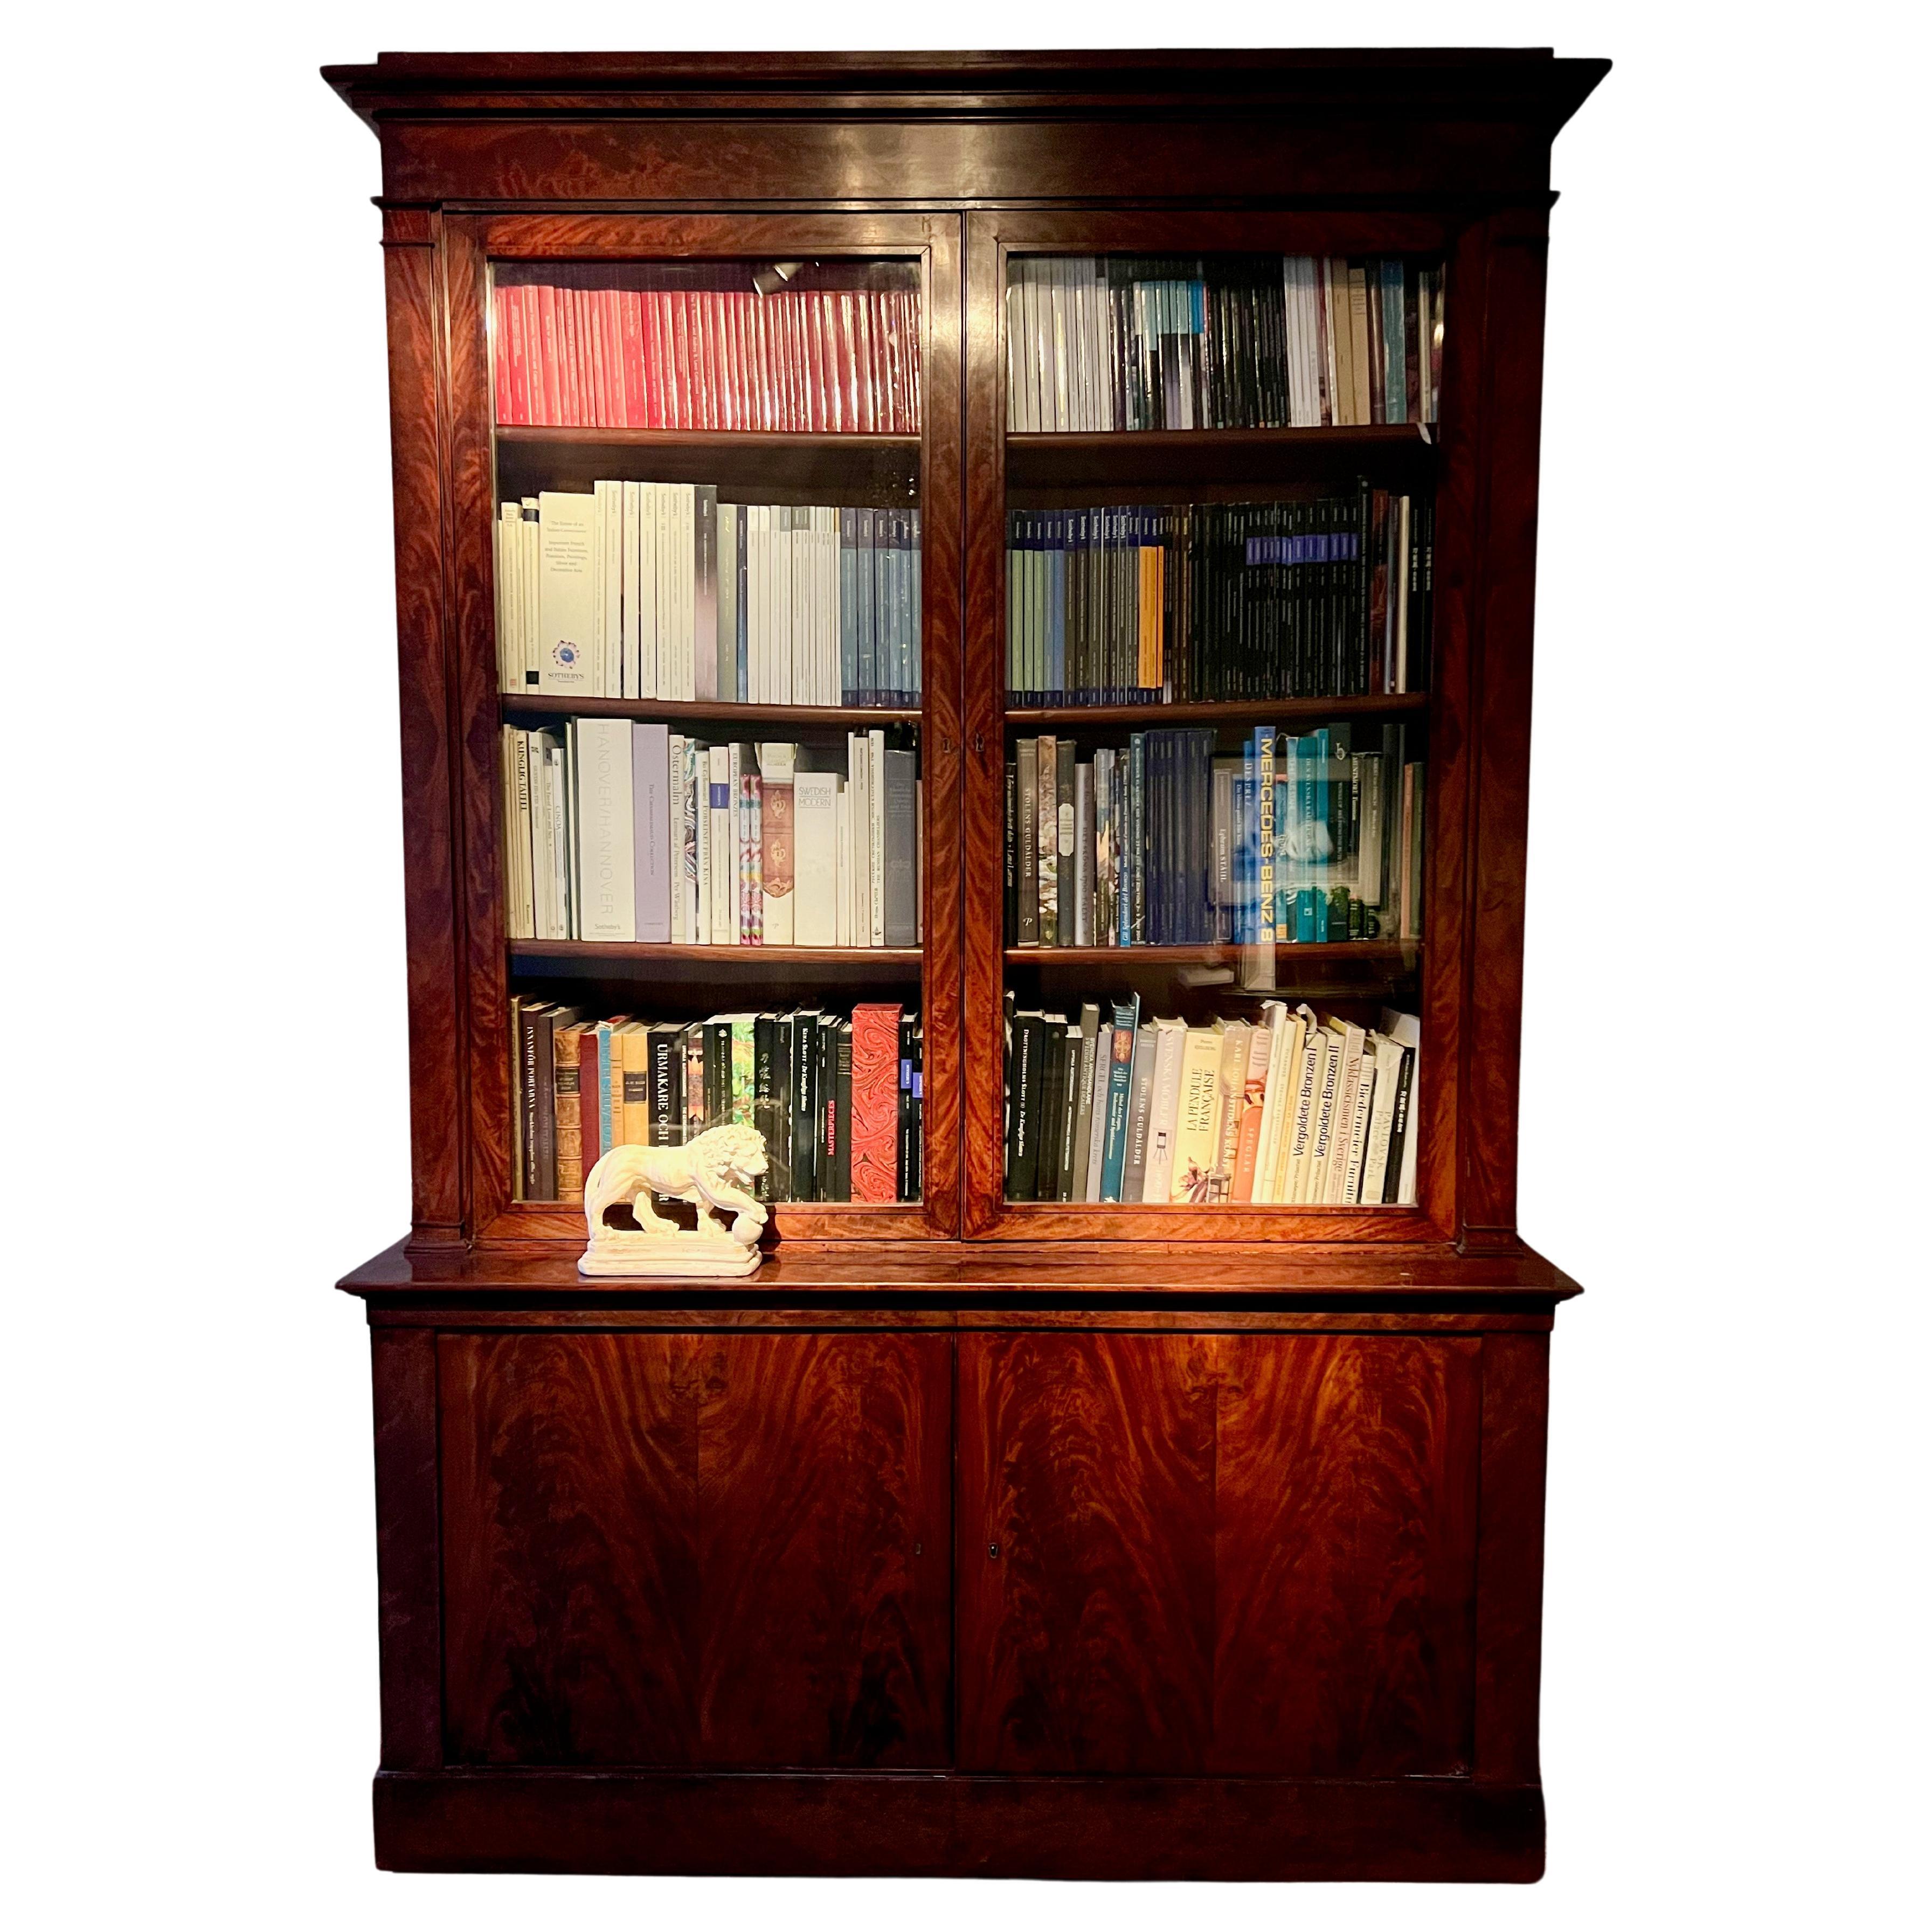 A very nice directoire/empire mahogany bookcase from around 1800 or early 19th century. The craftsmanship and quality of this piece is high and above what you normally see. It's mahogany veneered on oak and in some parts made in massive mahogany. It